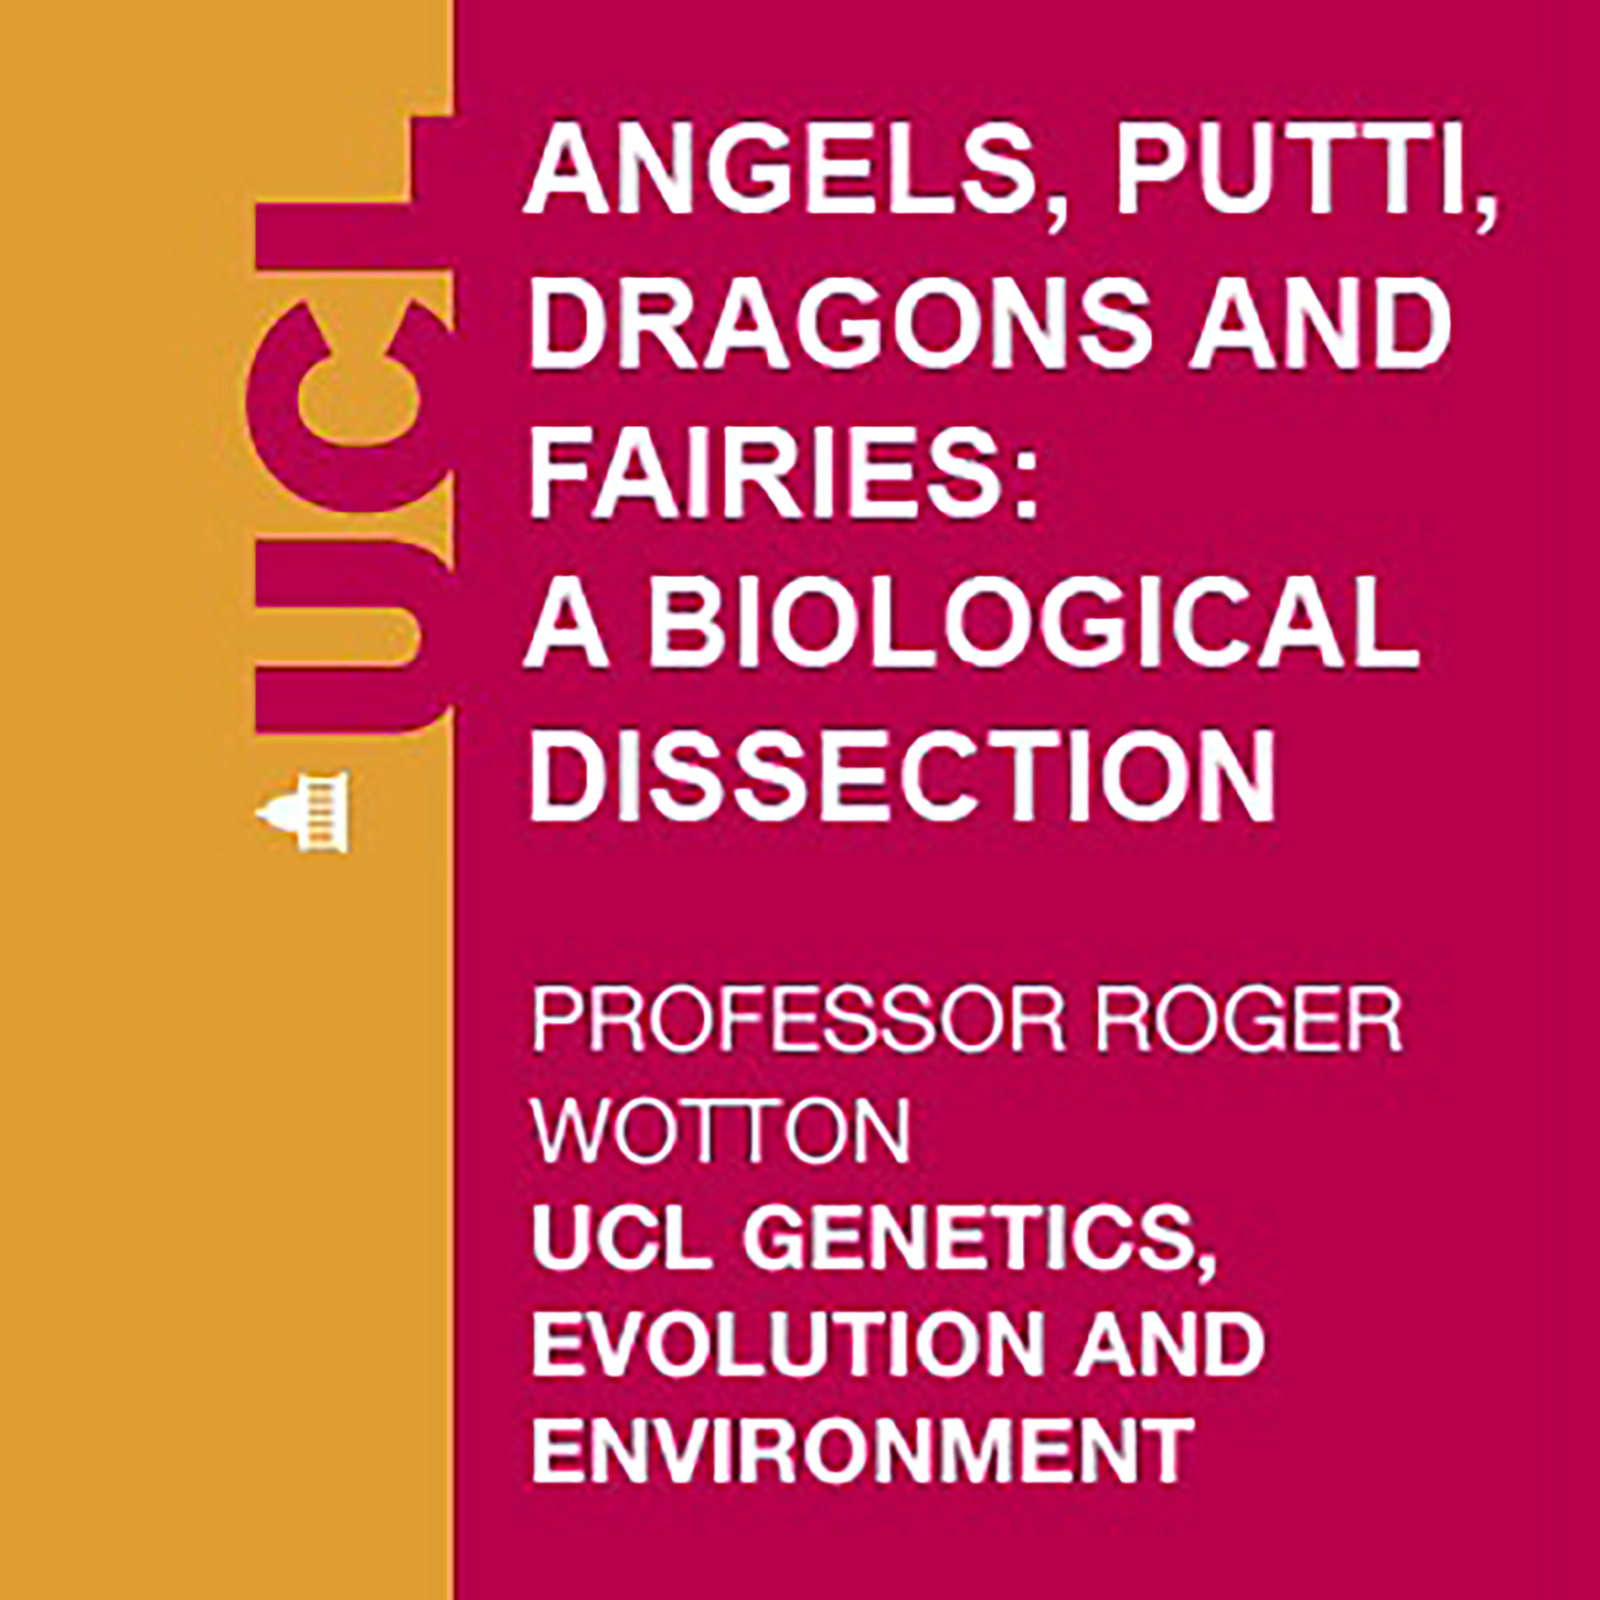 Angels, Putti, Dragons and Fairies: A Biological Dissection